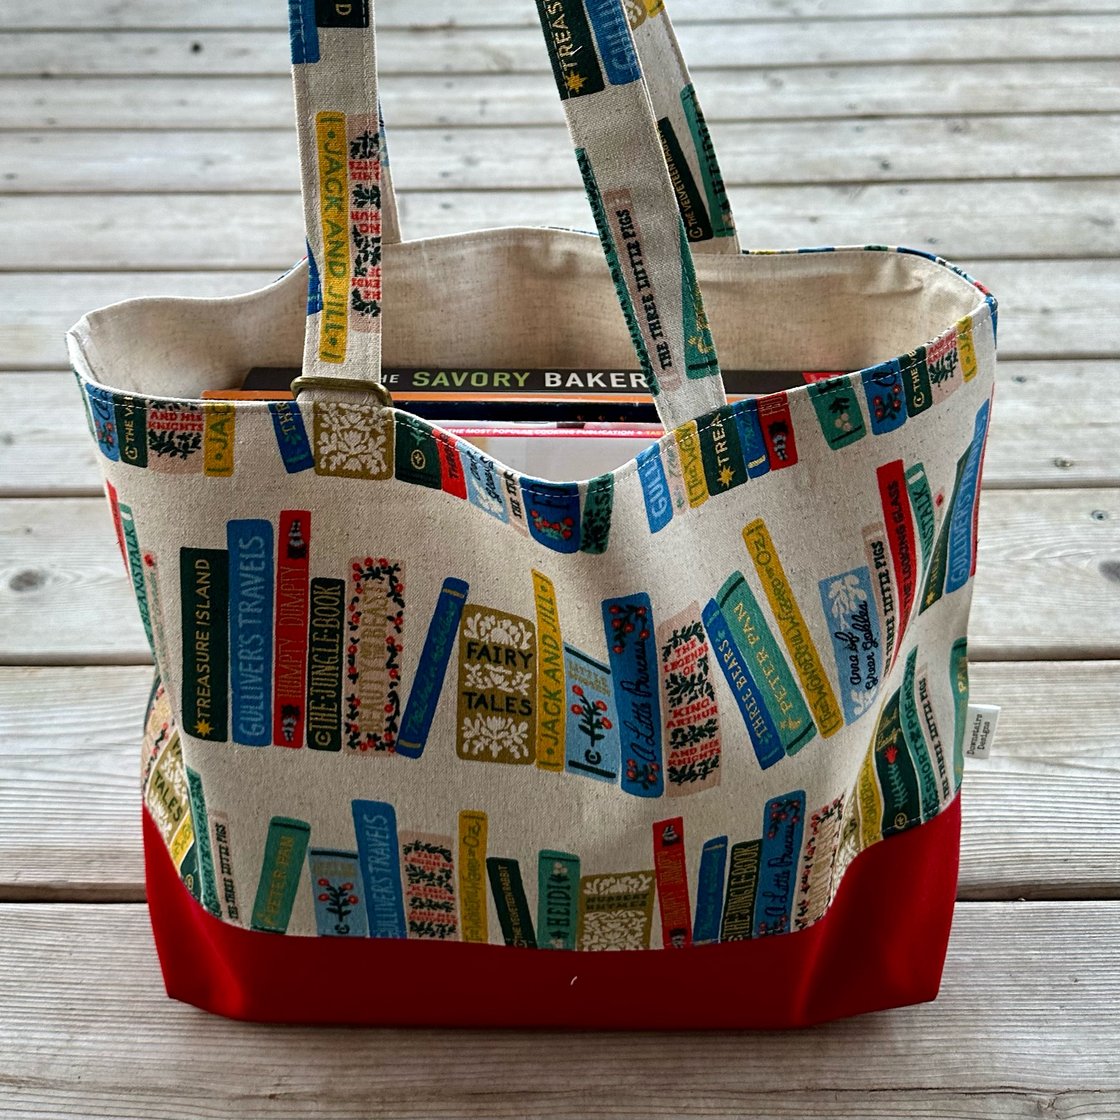 Image of Market Tote Melody Miller Strawberries